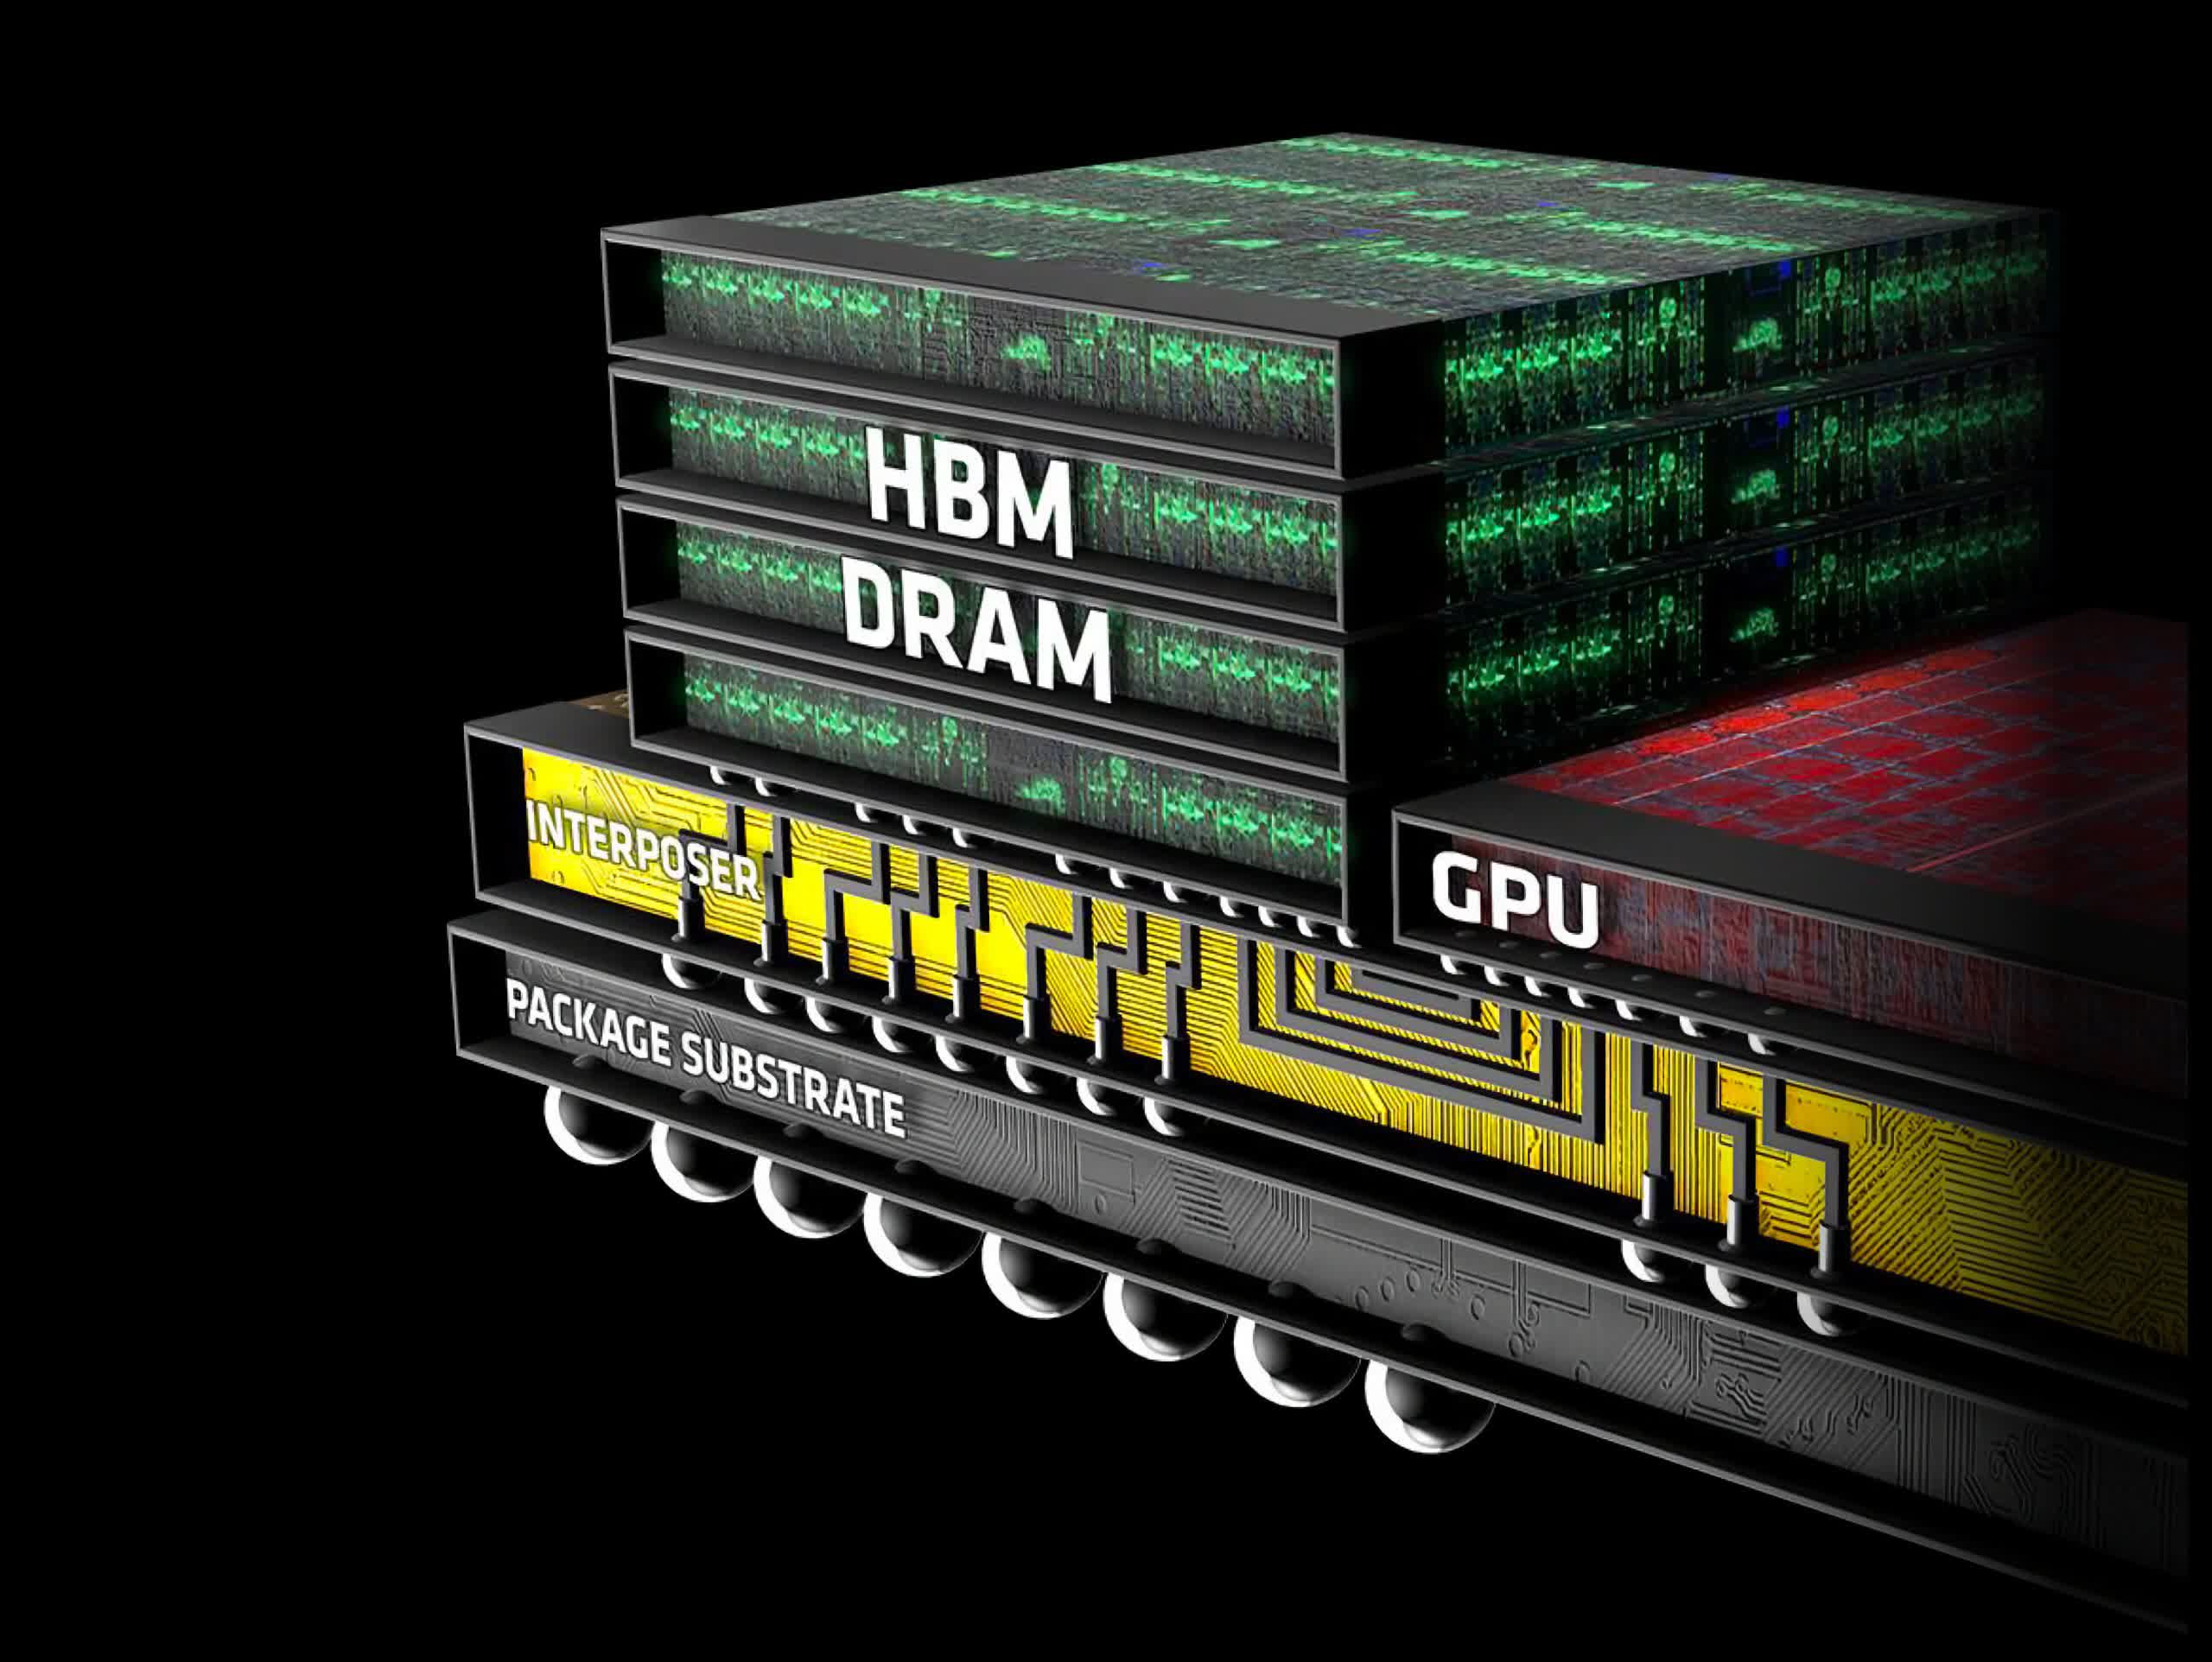 Nvidia is eyeing next-gen HBM3E memory for future AI and HPC GPUs